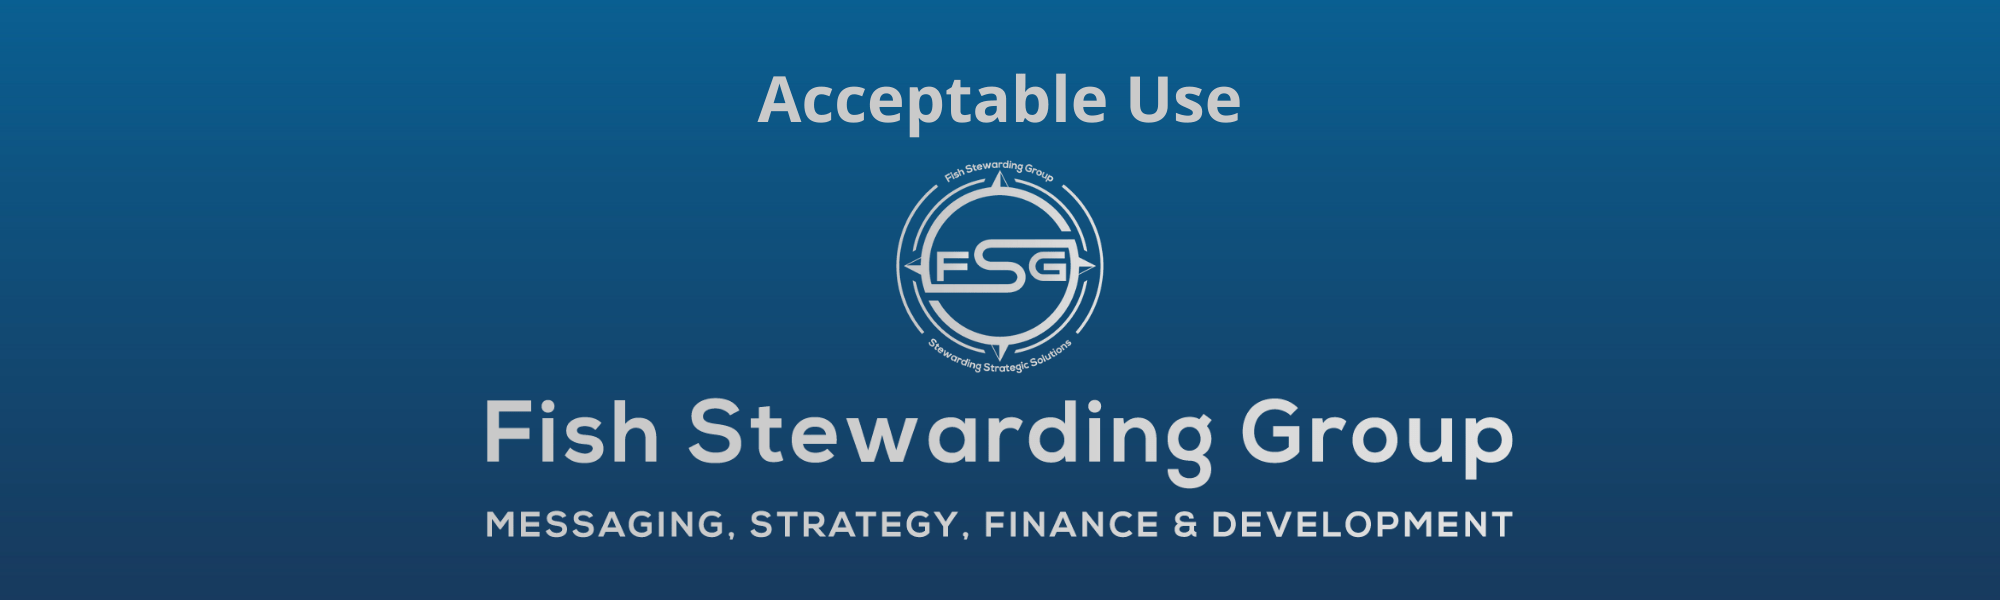 A thin rectangular Footer graphic for the Acceptable Use page. The background is a blue gradient color that goes from a dark blue on the bottom to a lighter blue on top. The text in gray on top reads Acceptable Use and FAQs. The text in gray on the bottom center reads: Fish Stewarding Group and beneath that, the text reads Messaging, Strategy, Finance and Development. In the center above the text is the FSG logo in gray. The logo has the letters FSG in the middle with a circle with four pointed arrows facing north, south, east and west with the S connected to that circle. Four rounded lines make the next circle of the circle and the last layer is a thin circle with the text on the Bottom that reads Stewarding Strategist Solutions and on top, the text reads Fish Stewarding Group.